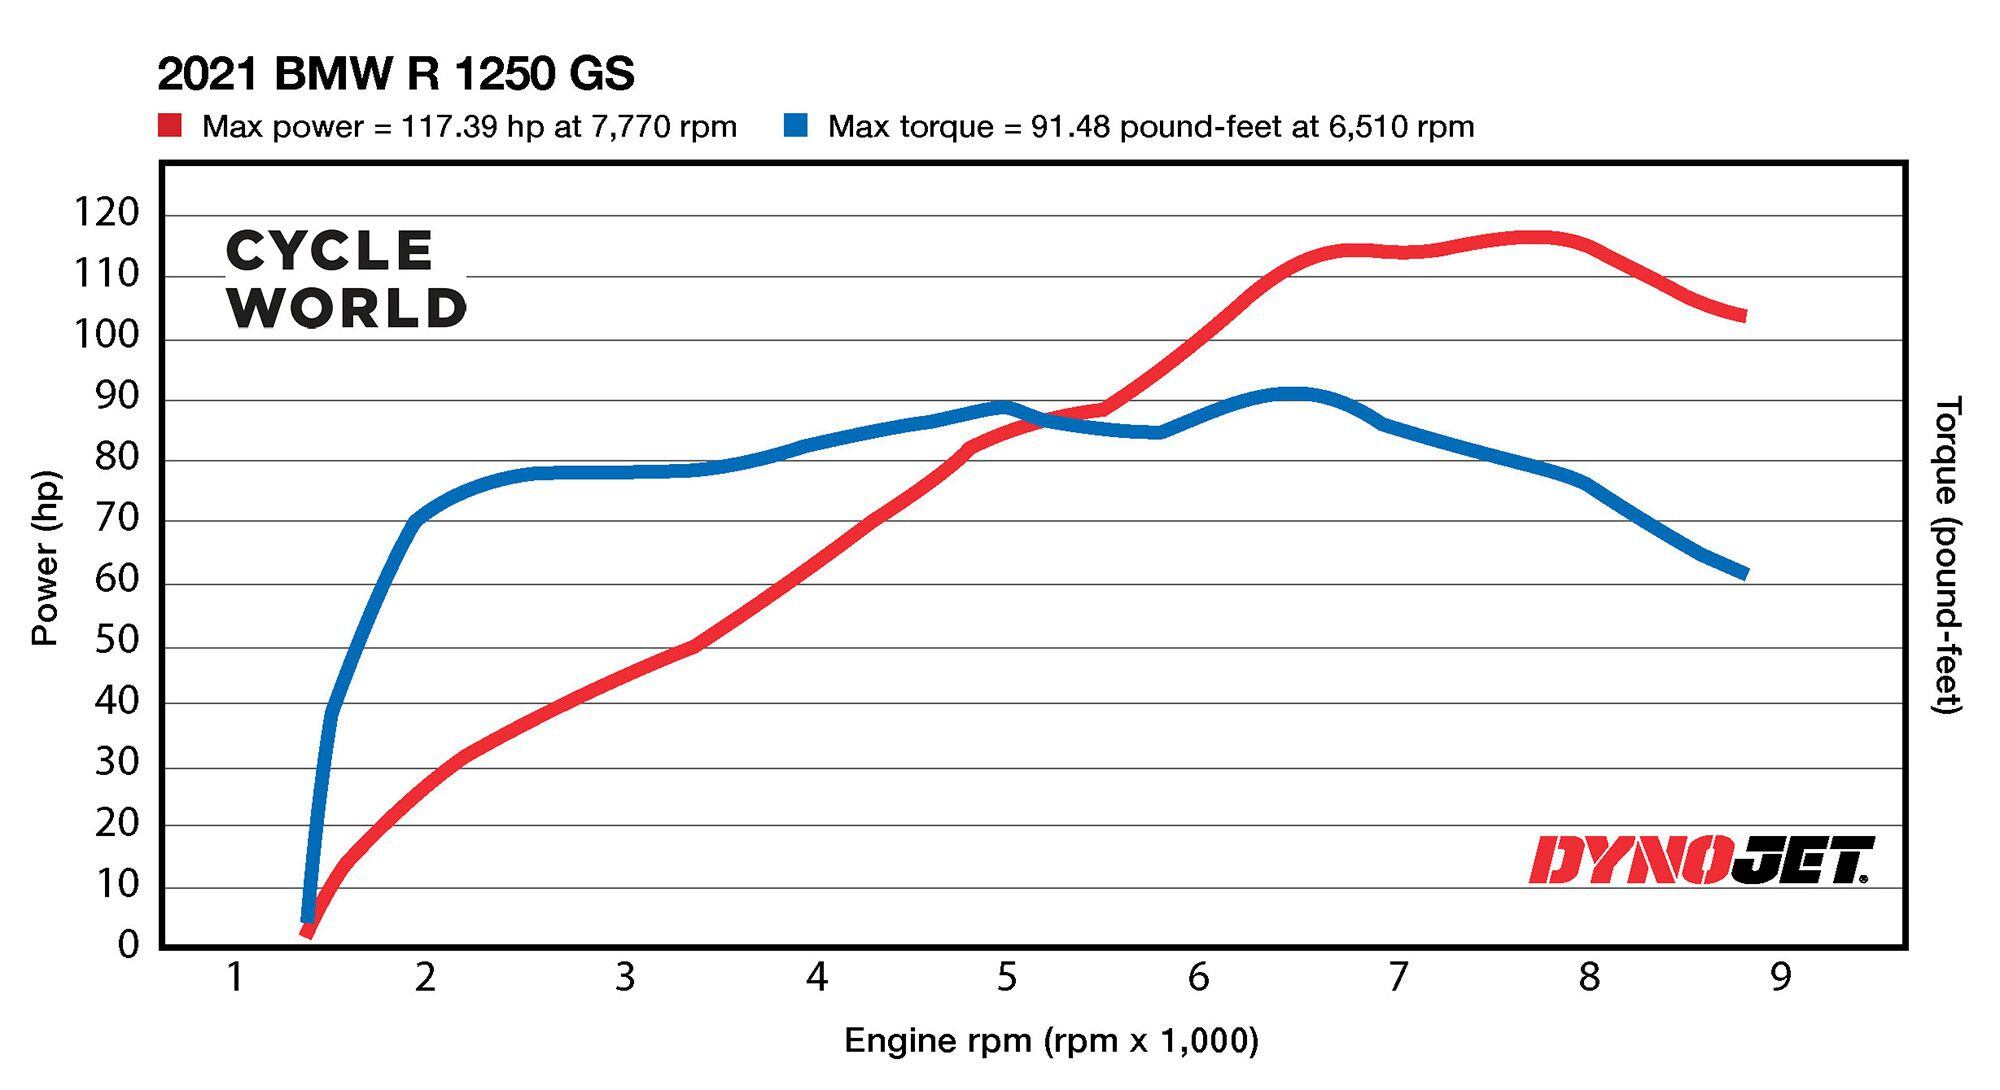 Horsepower and torque figures on the 2021 BMW R 1250 GS.